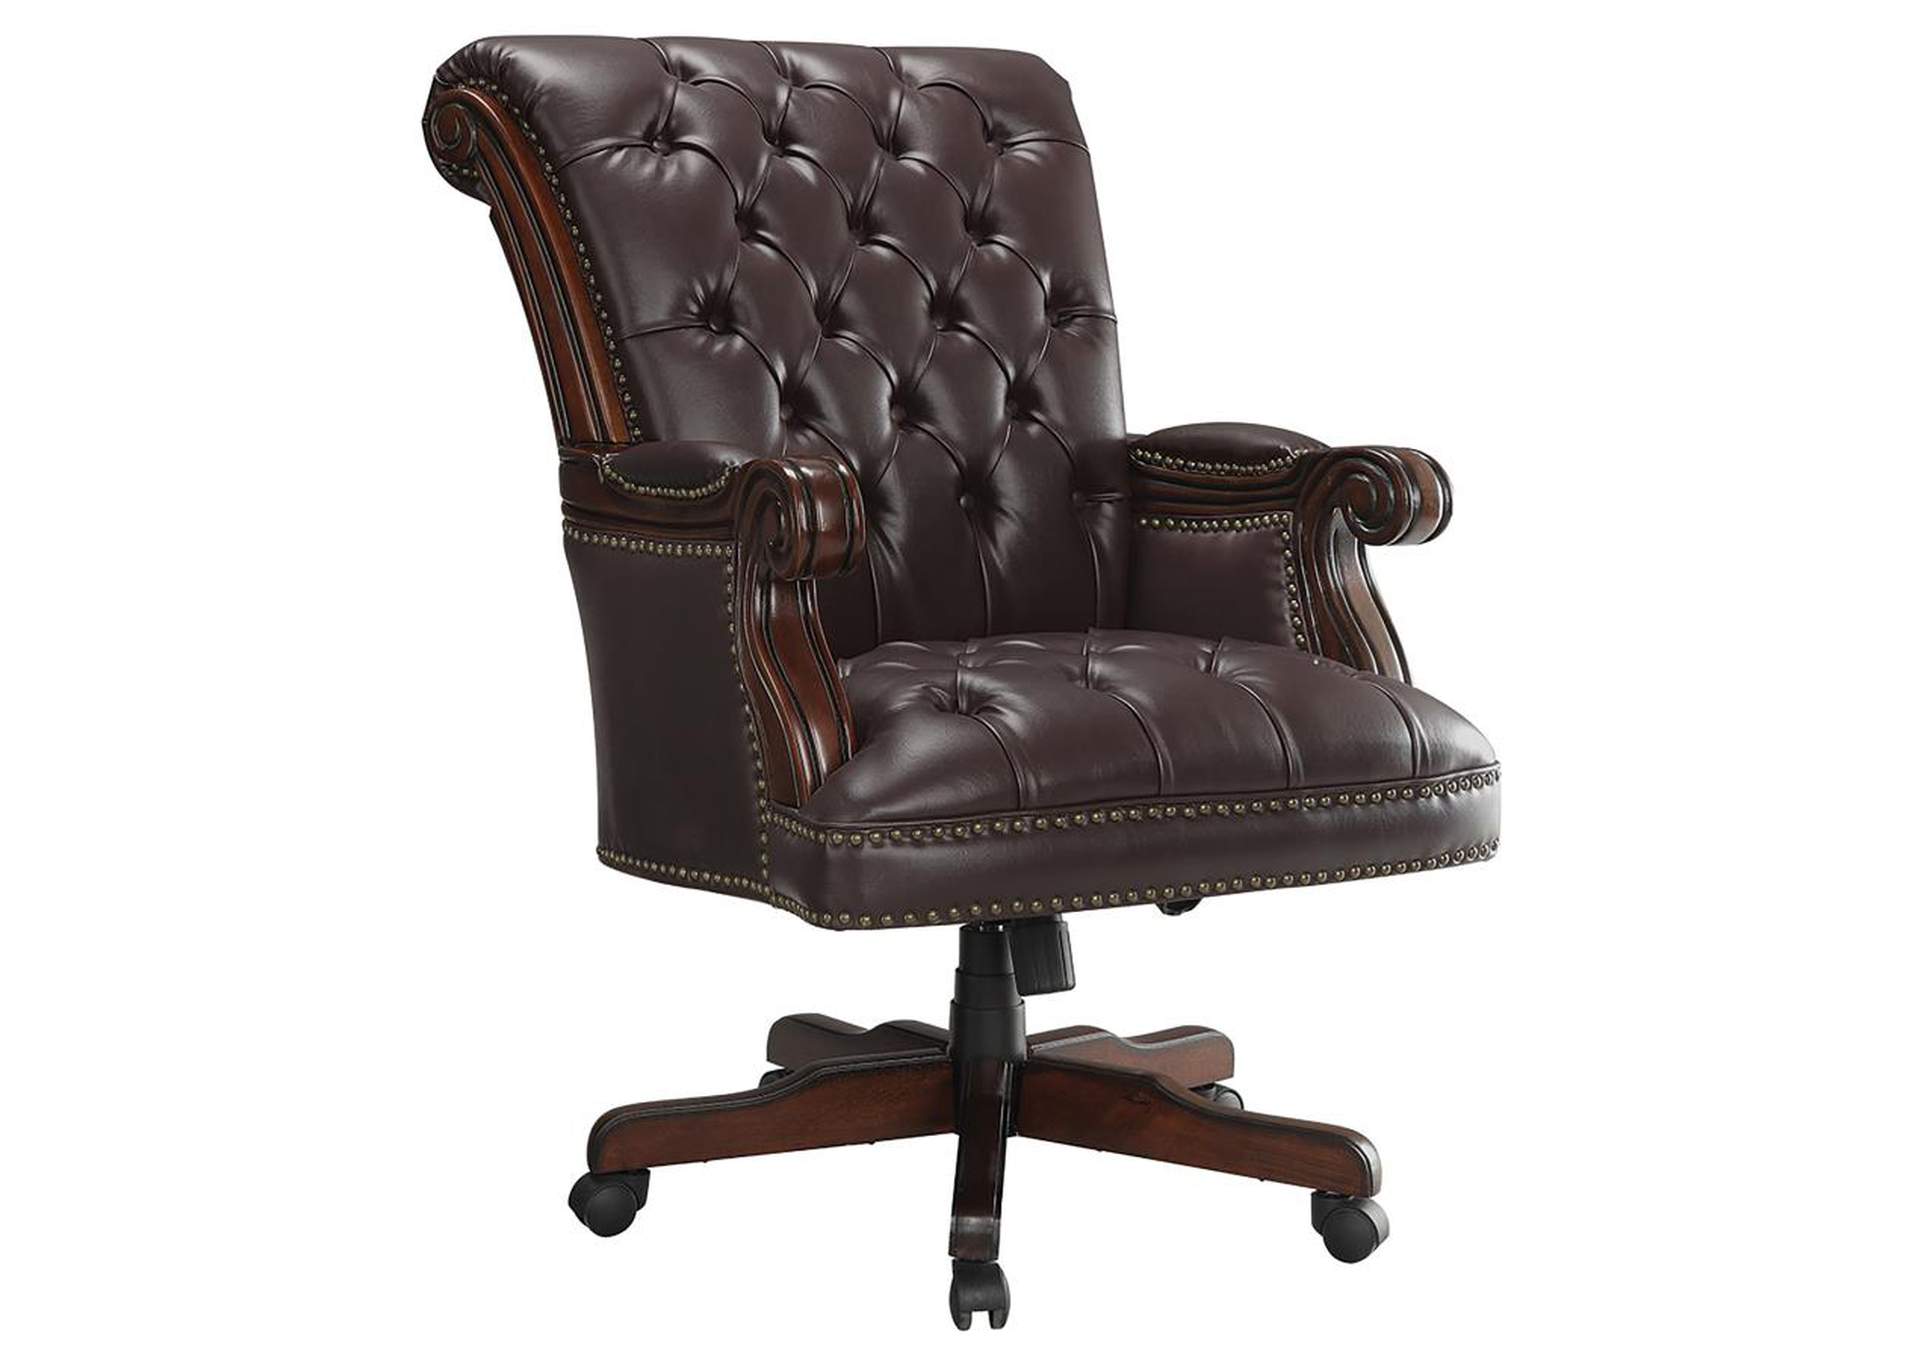 Calloway Tufted Adjustable Height Office Chair Dark Brown,Coaster Furniture